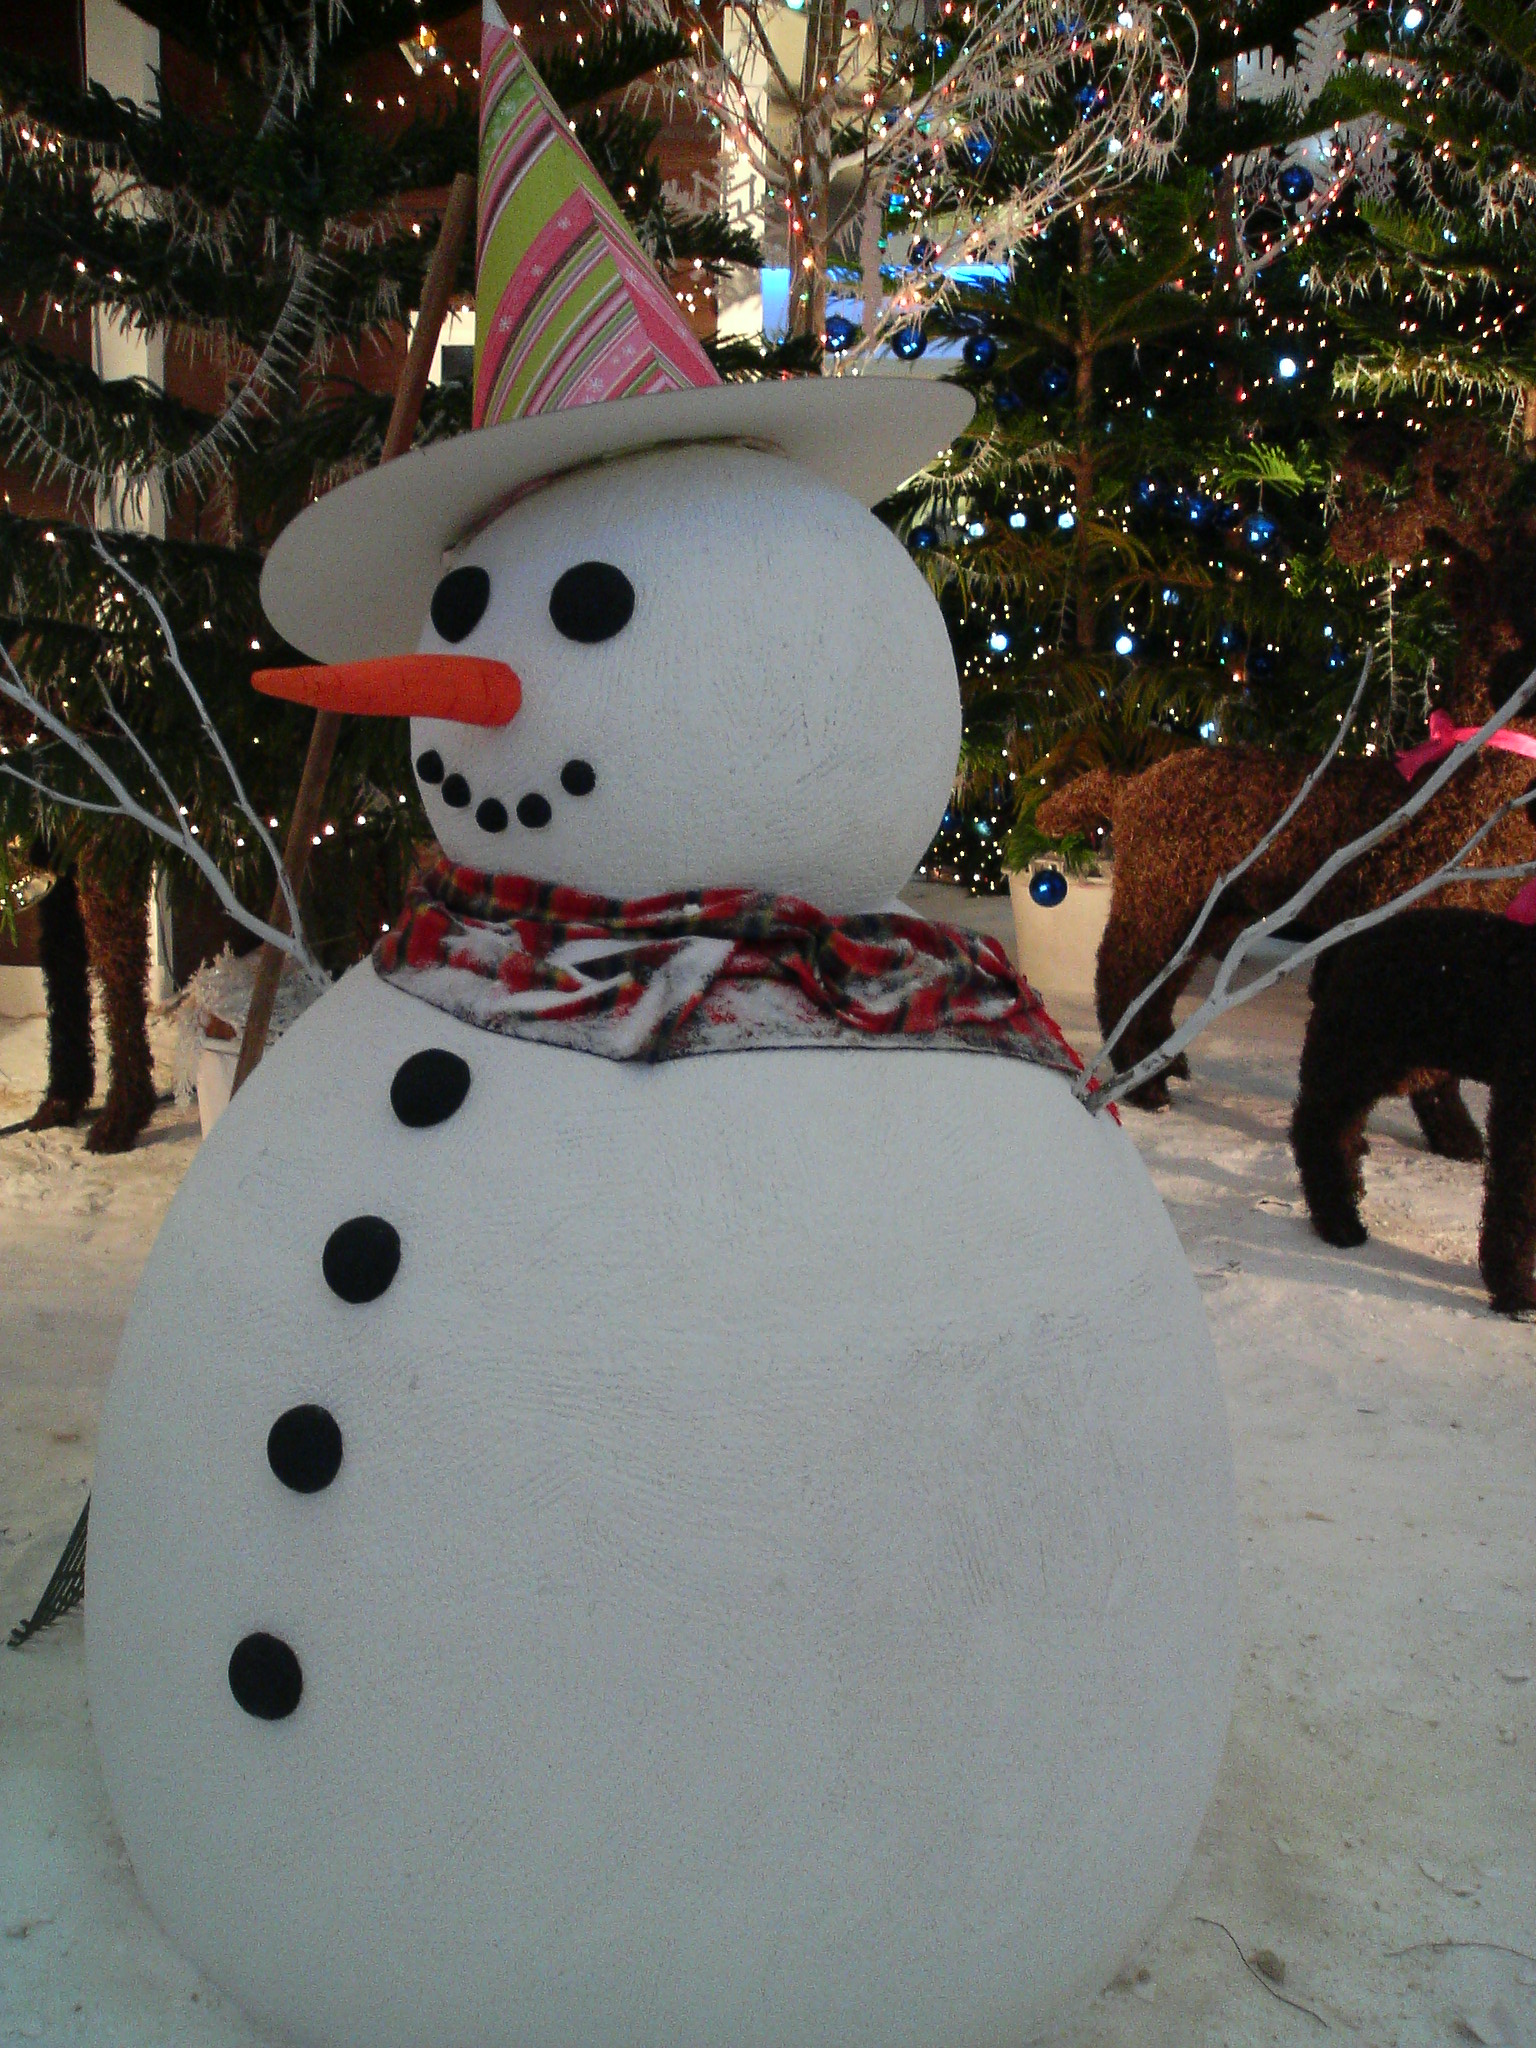 the large snowman has a red and green plaid scarf on it's neck